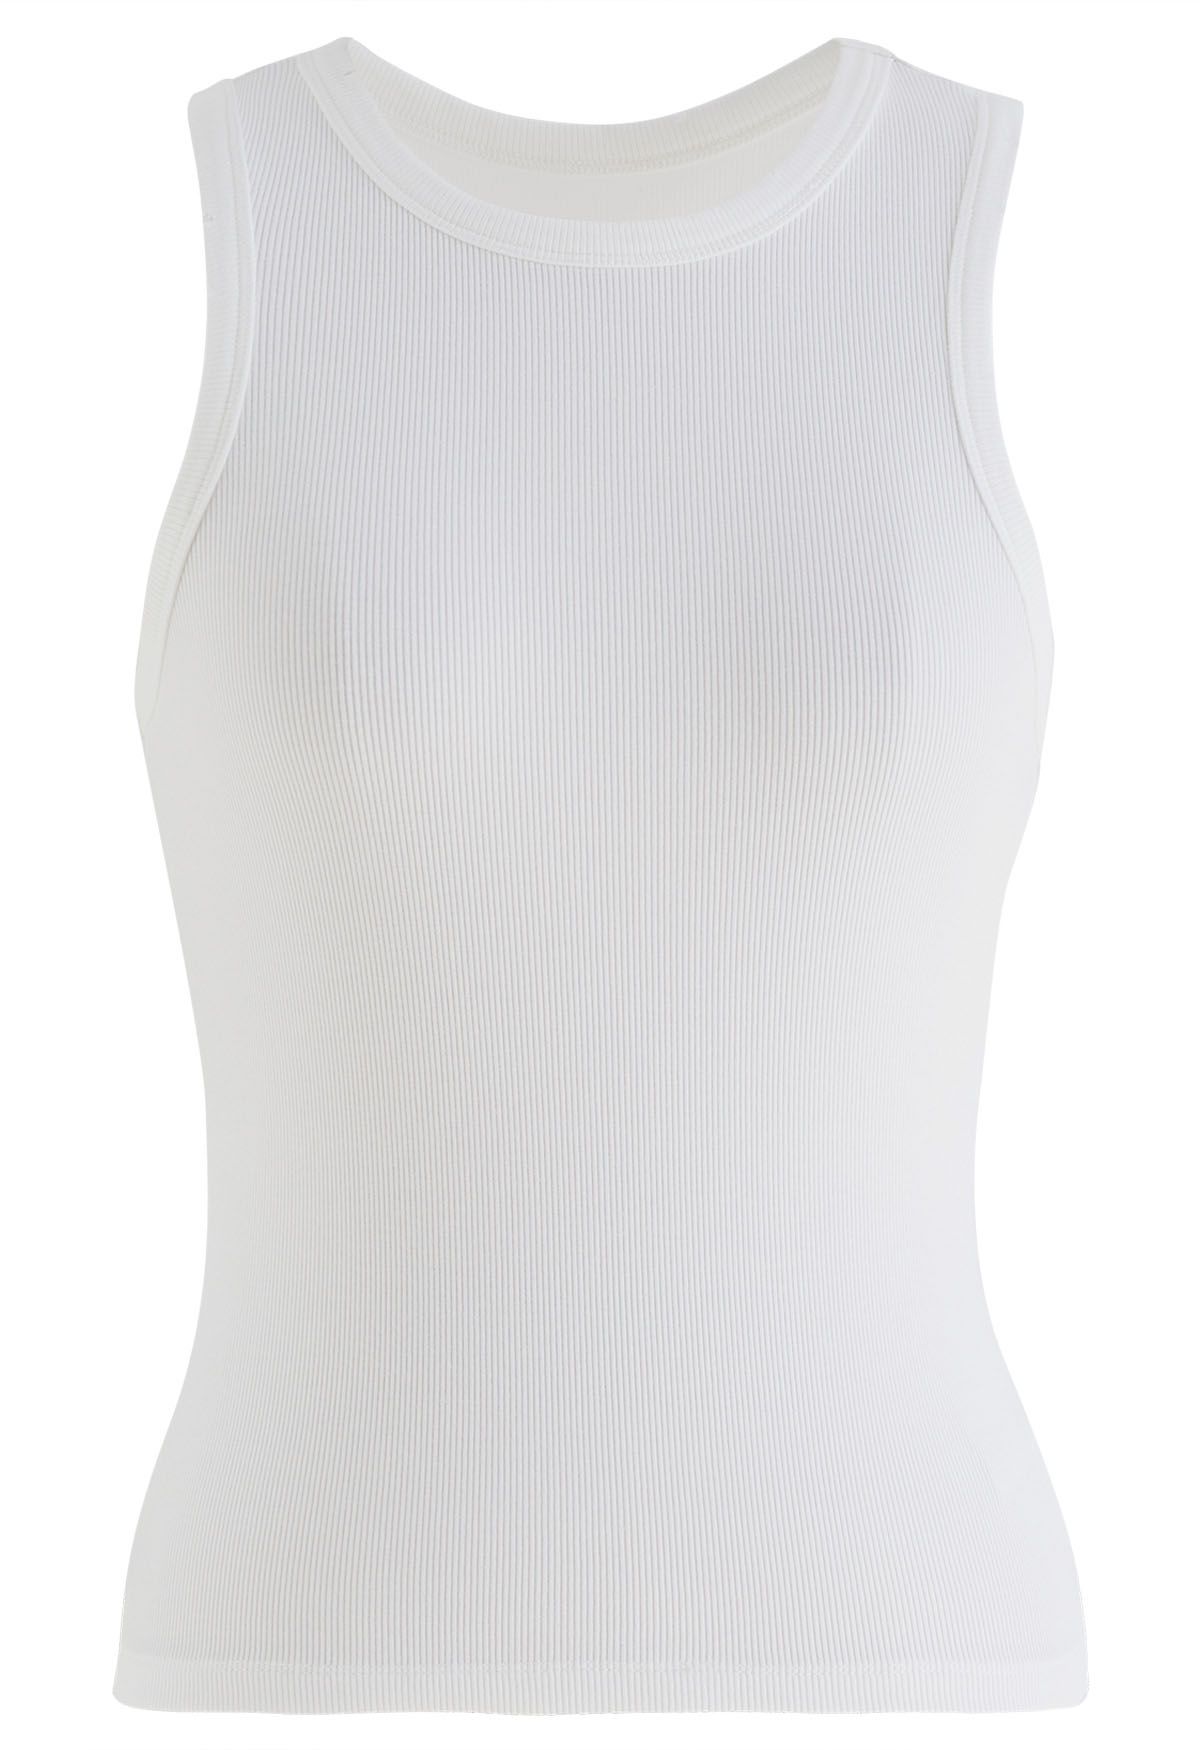 Washed Frayed Edge Ribbed Tank Top in White - Retro, Indie and